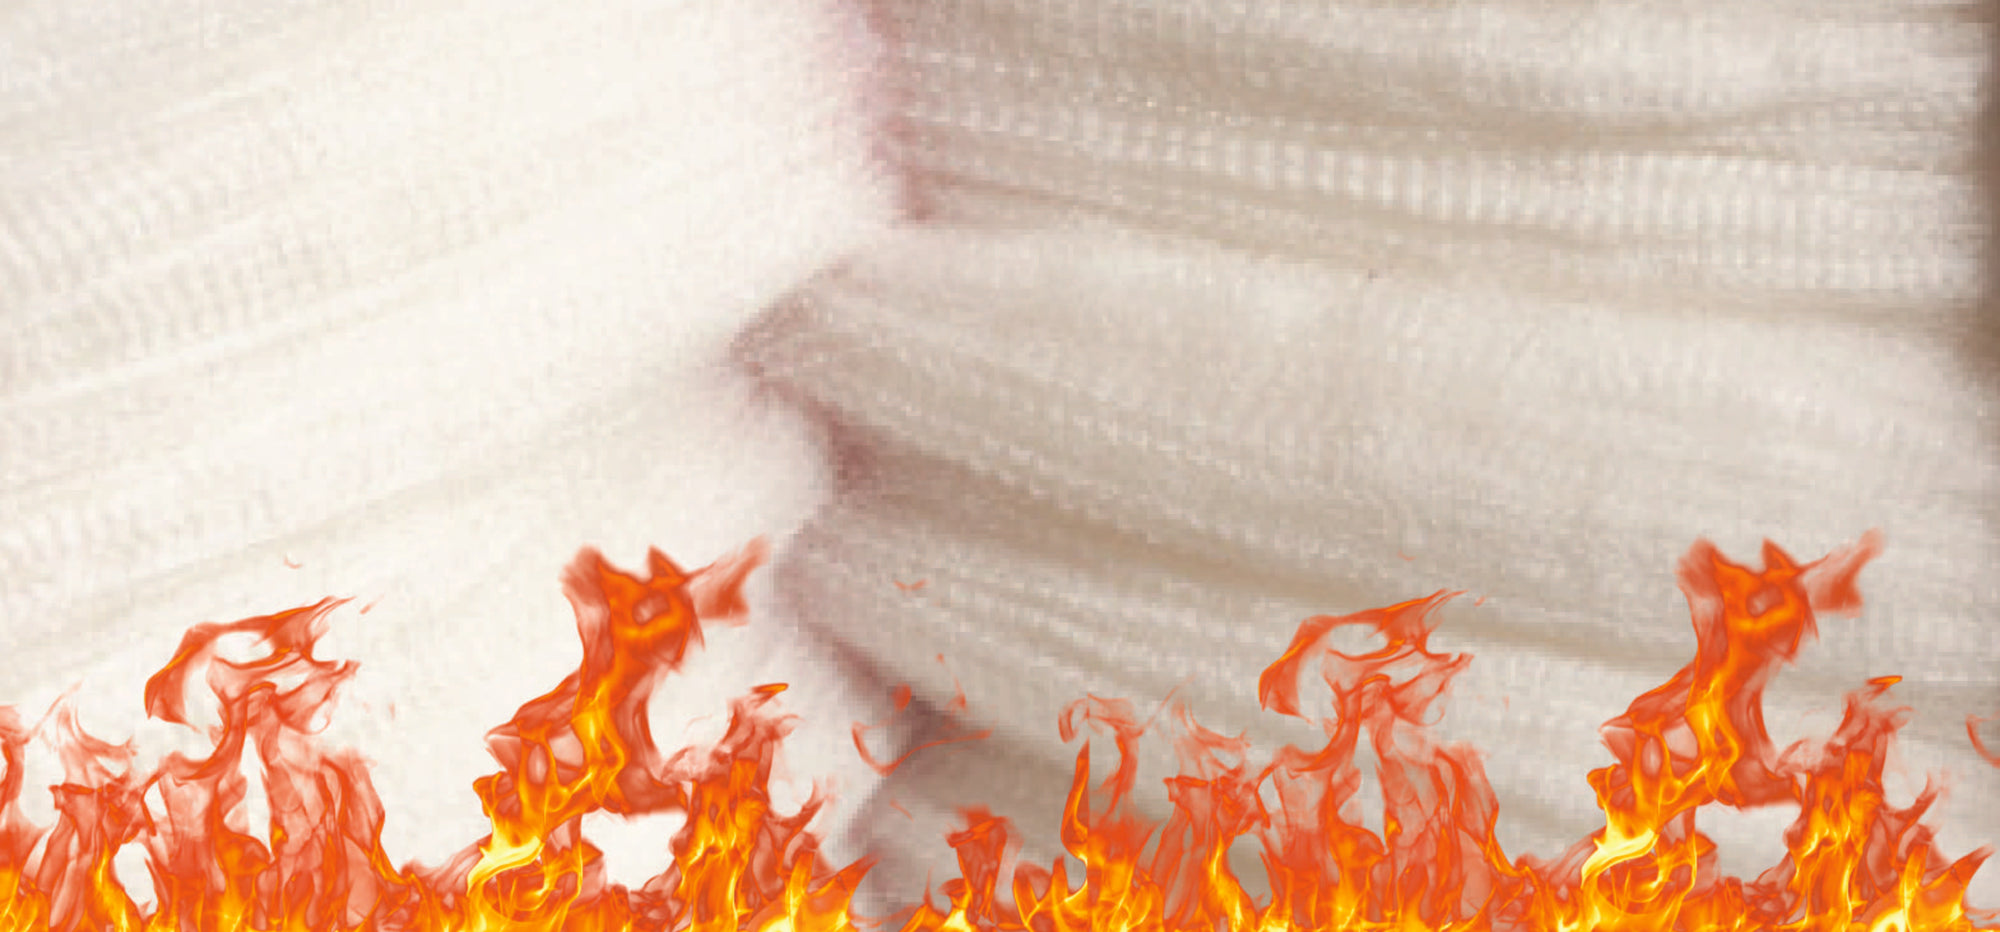 How wool is fire resistant compared to other fibres